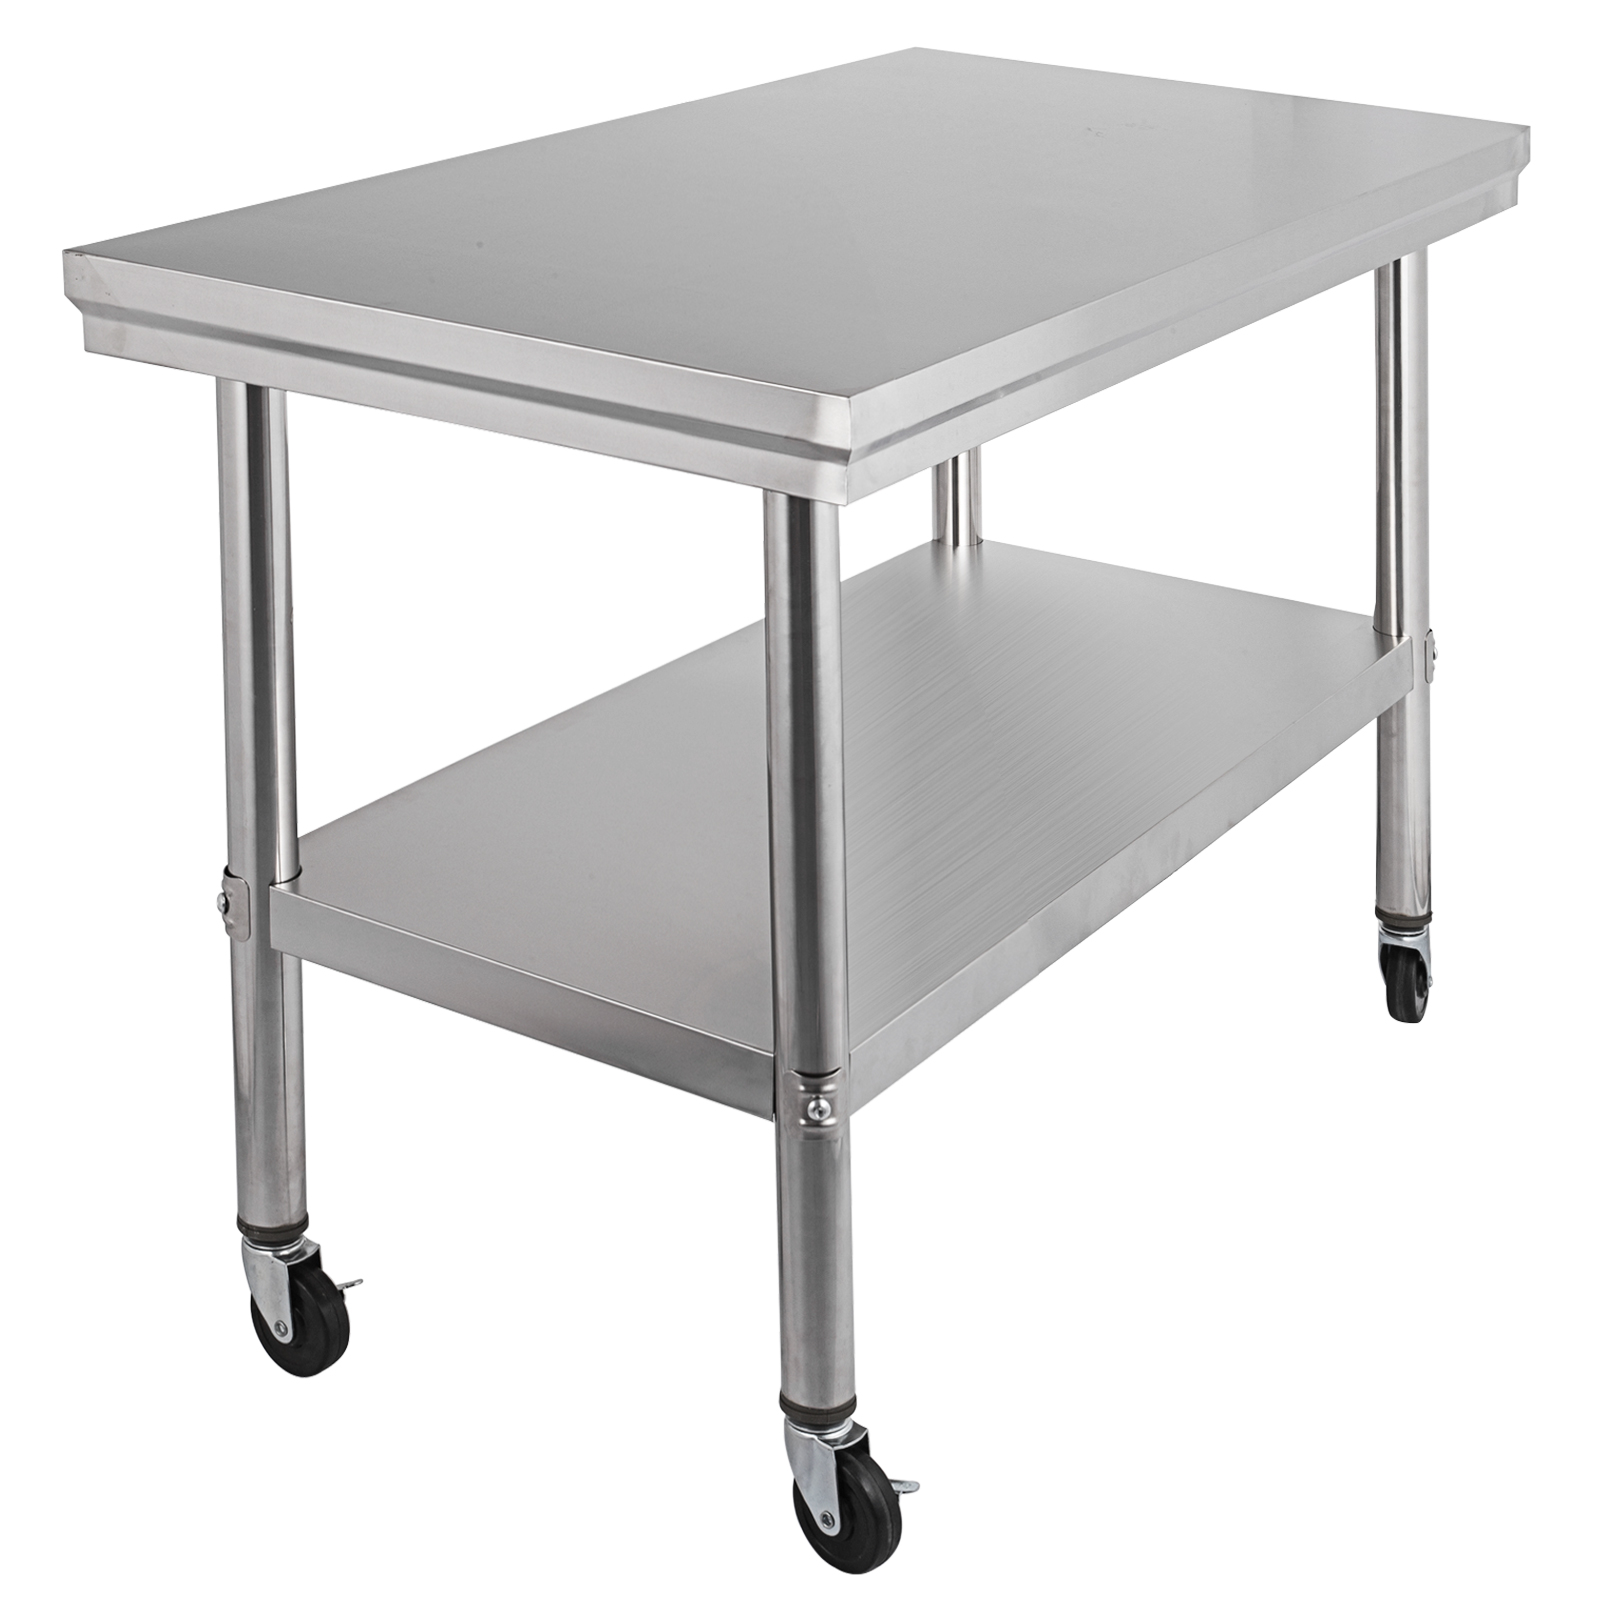 Commercial 30" x 24" Stainless Steel Work Prep Table With 4 Wheels Stainless Steel Utility Table With Wheels